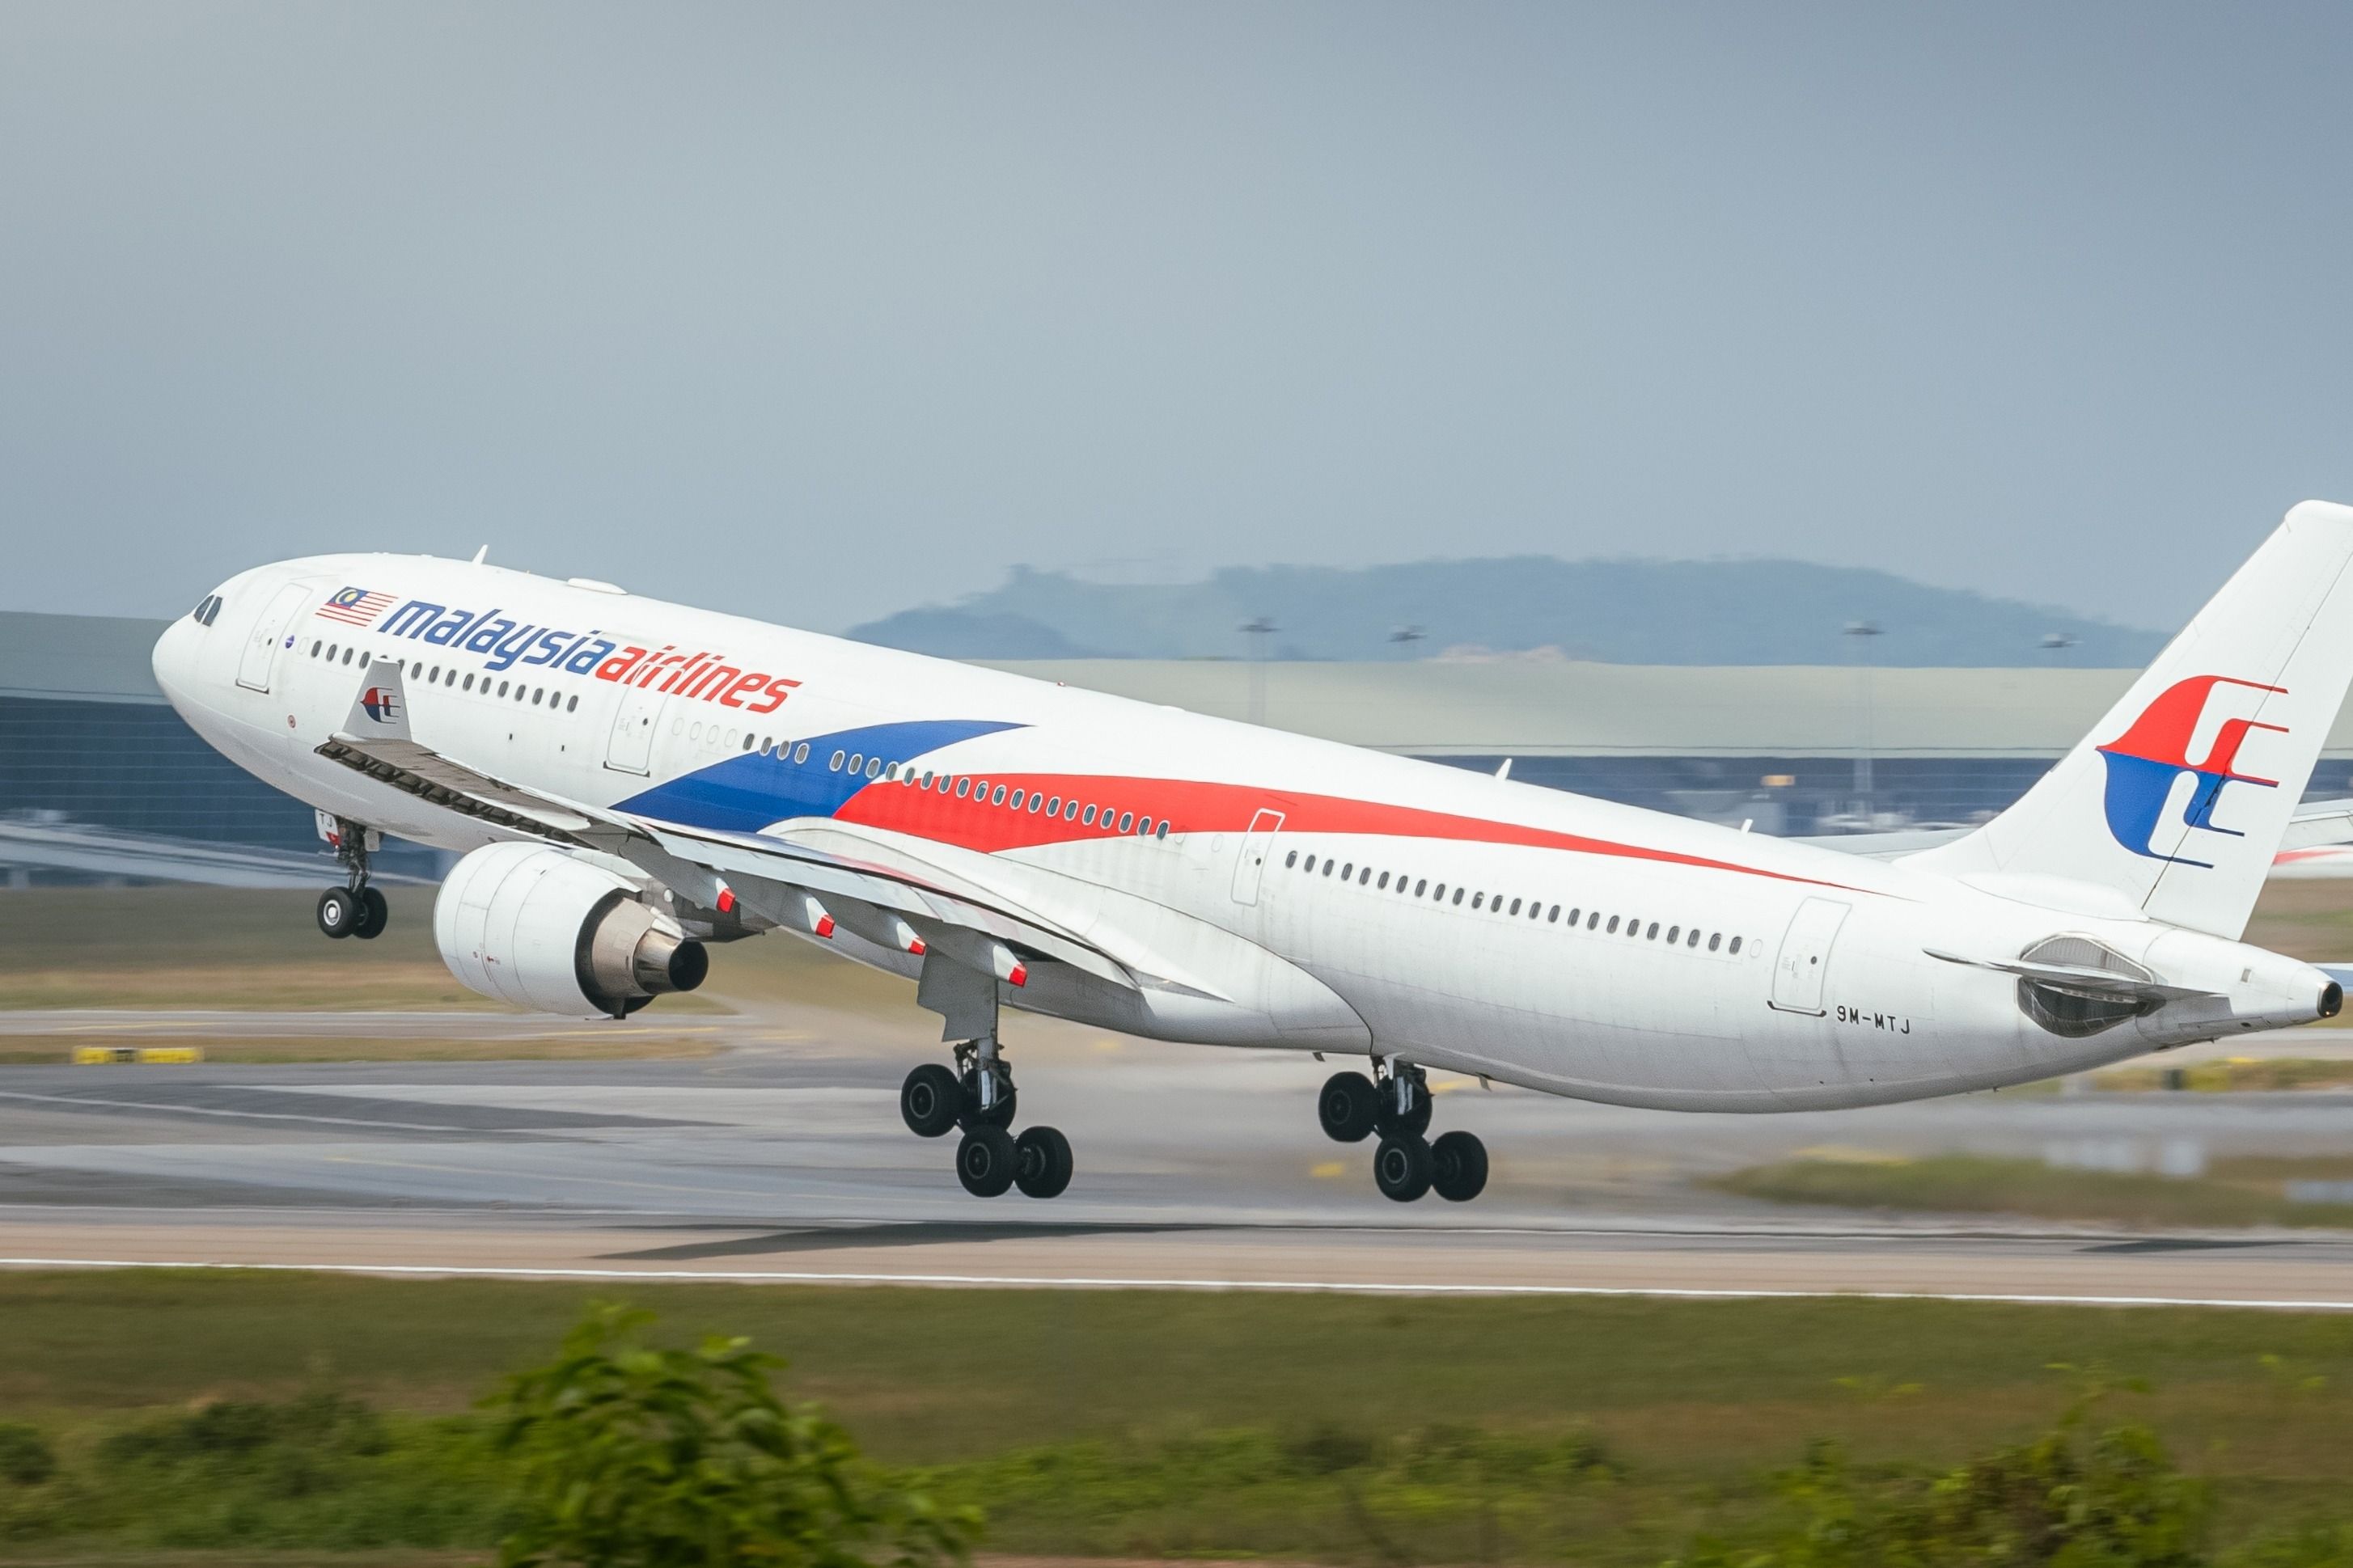 Malaysia Airlines Airbus A330 taking off.